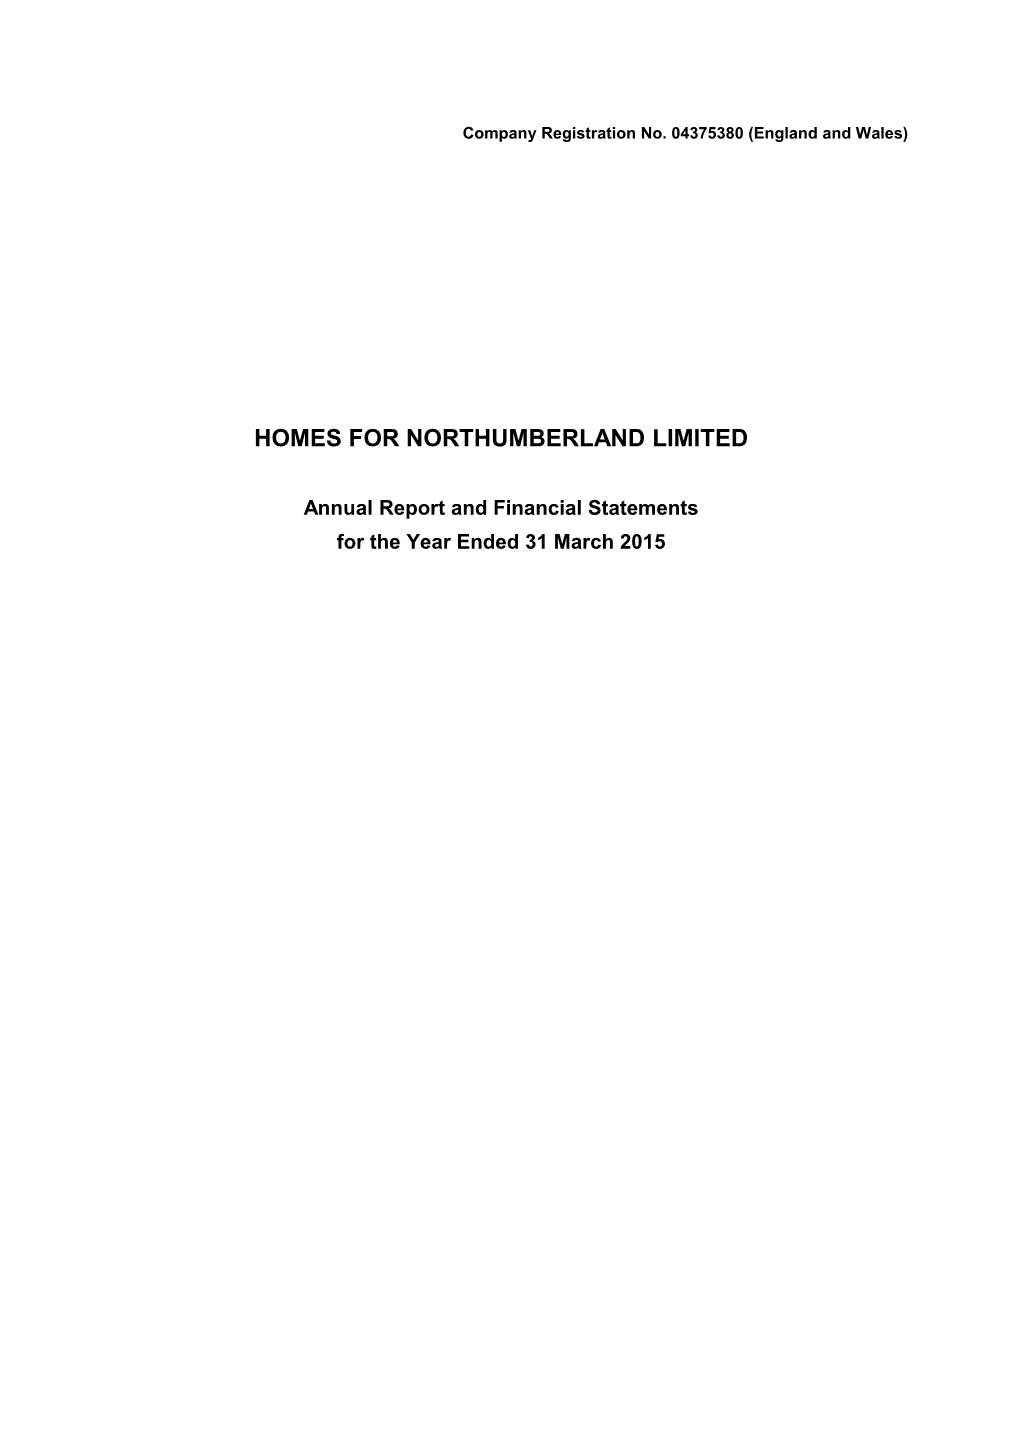 Homes for Northumberland Limited